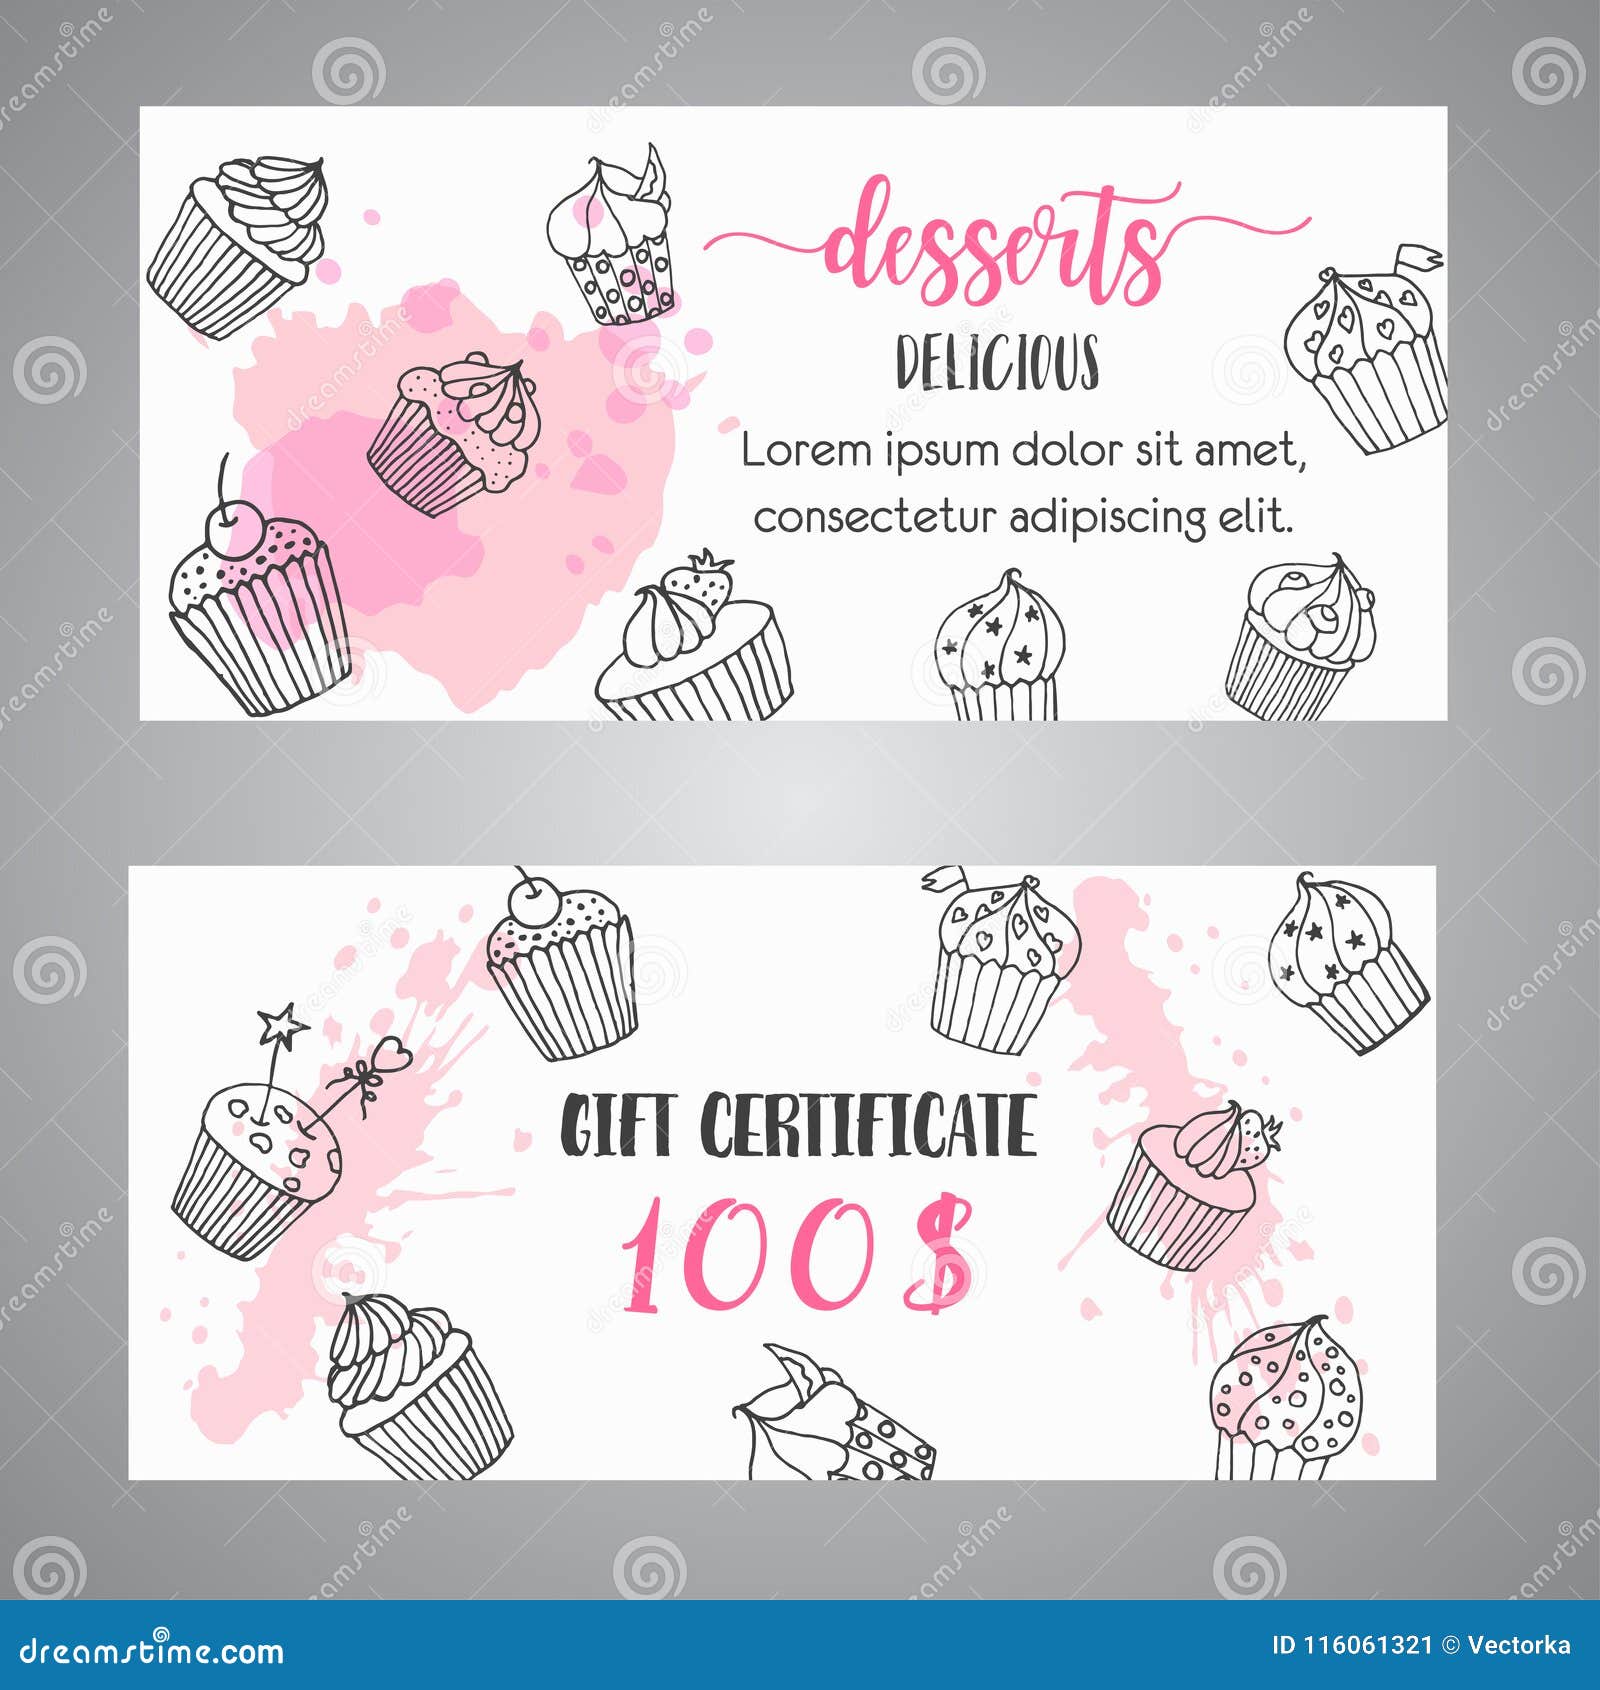 Cupcake Gift Certificate With Handdrawn Cupcakes And Pink Splashes Coupon With Desserts Promo Banner For Bakery Stock Vector Illustration Of Bake Desser 116061321